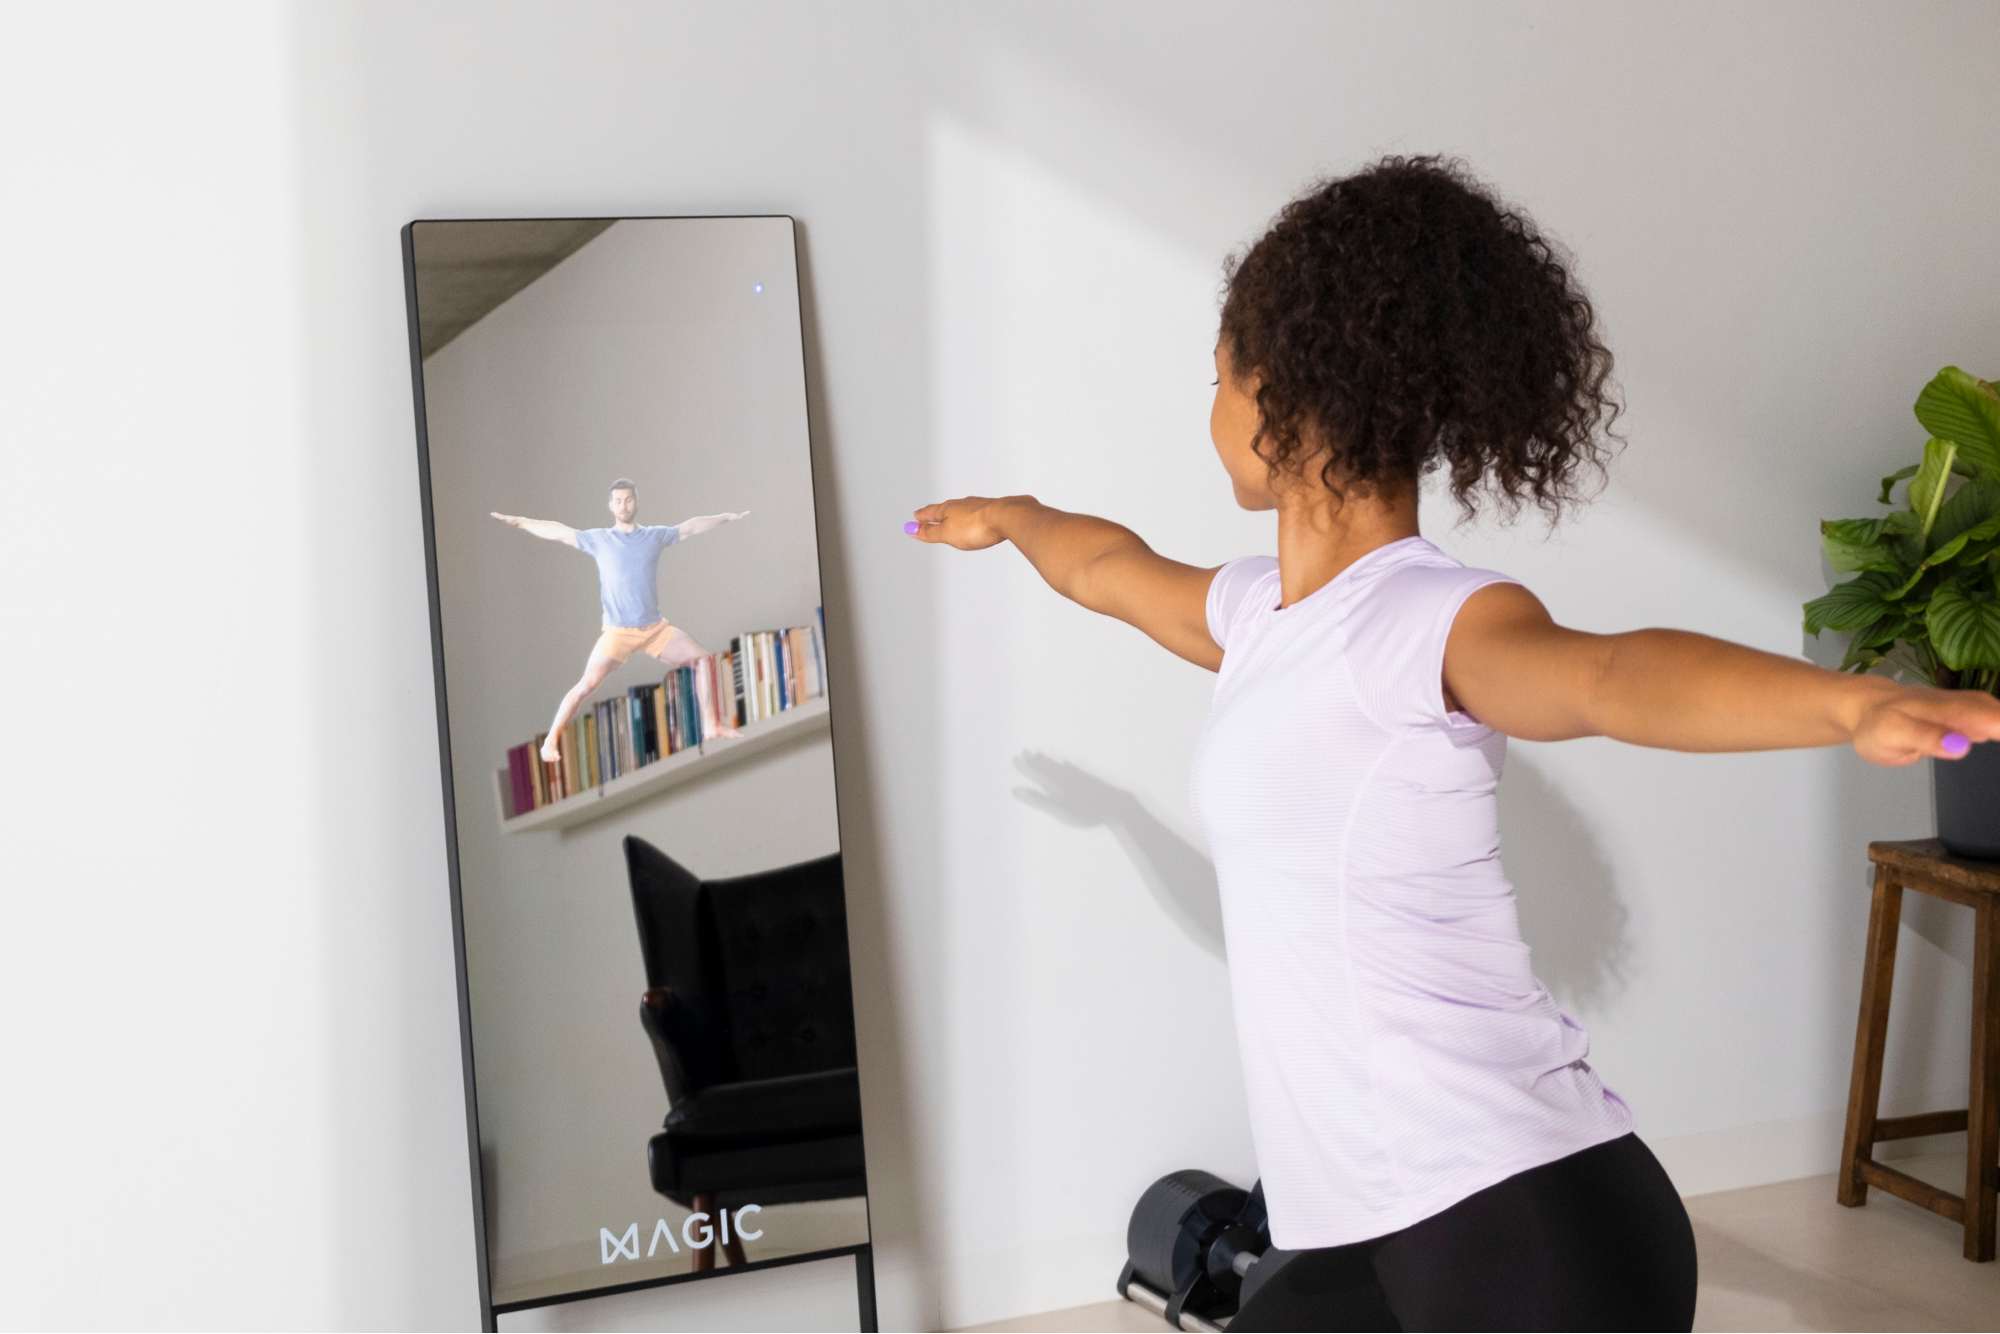 Ultra-Resolution Vision Fit Personal Trainer Fitness Mirror